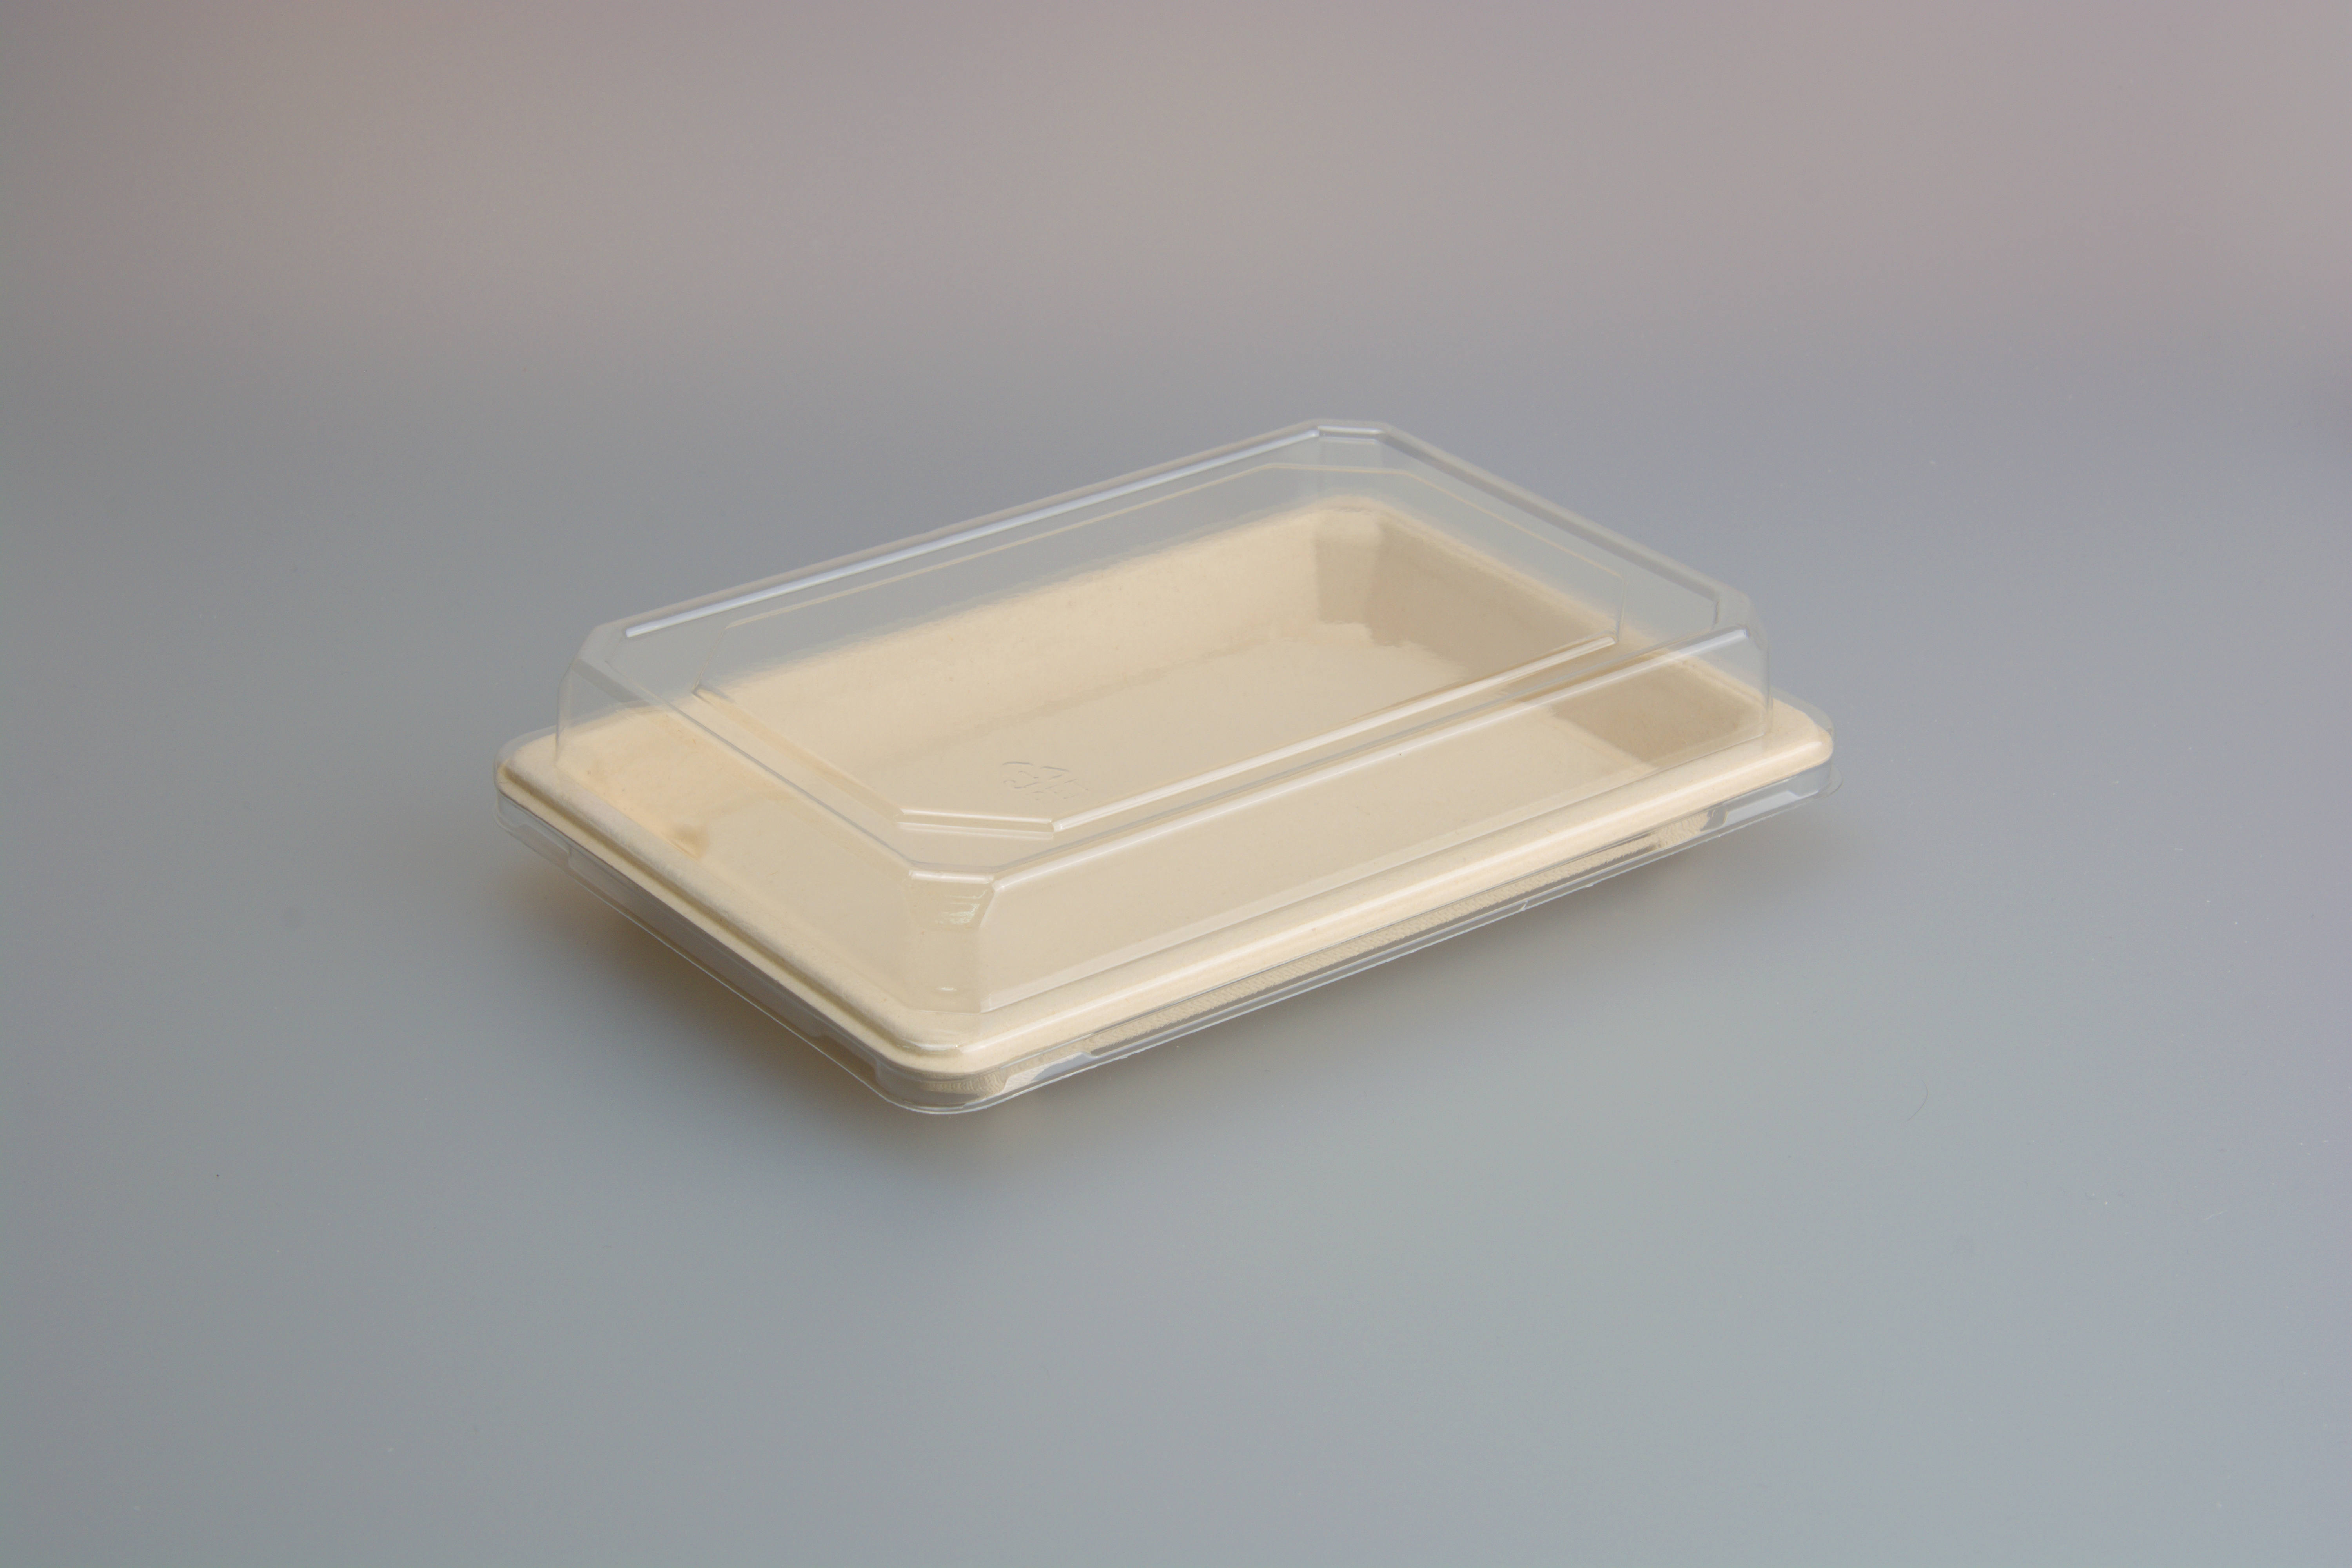 Manufactur standard Food Trays Biodegradable - 7.3*5.0 INCH Sushi Trays, Disposable Sushi Containers With Lids – Short, Take Out Containers For Appetizers, Entrees, or Desserts, Black Plasti...